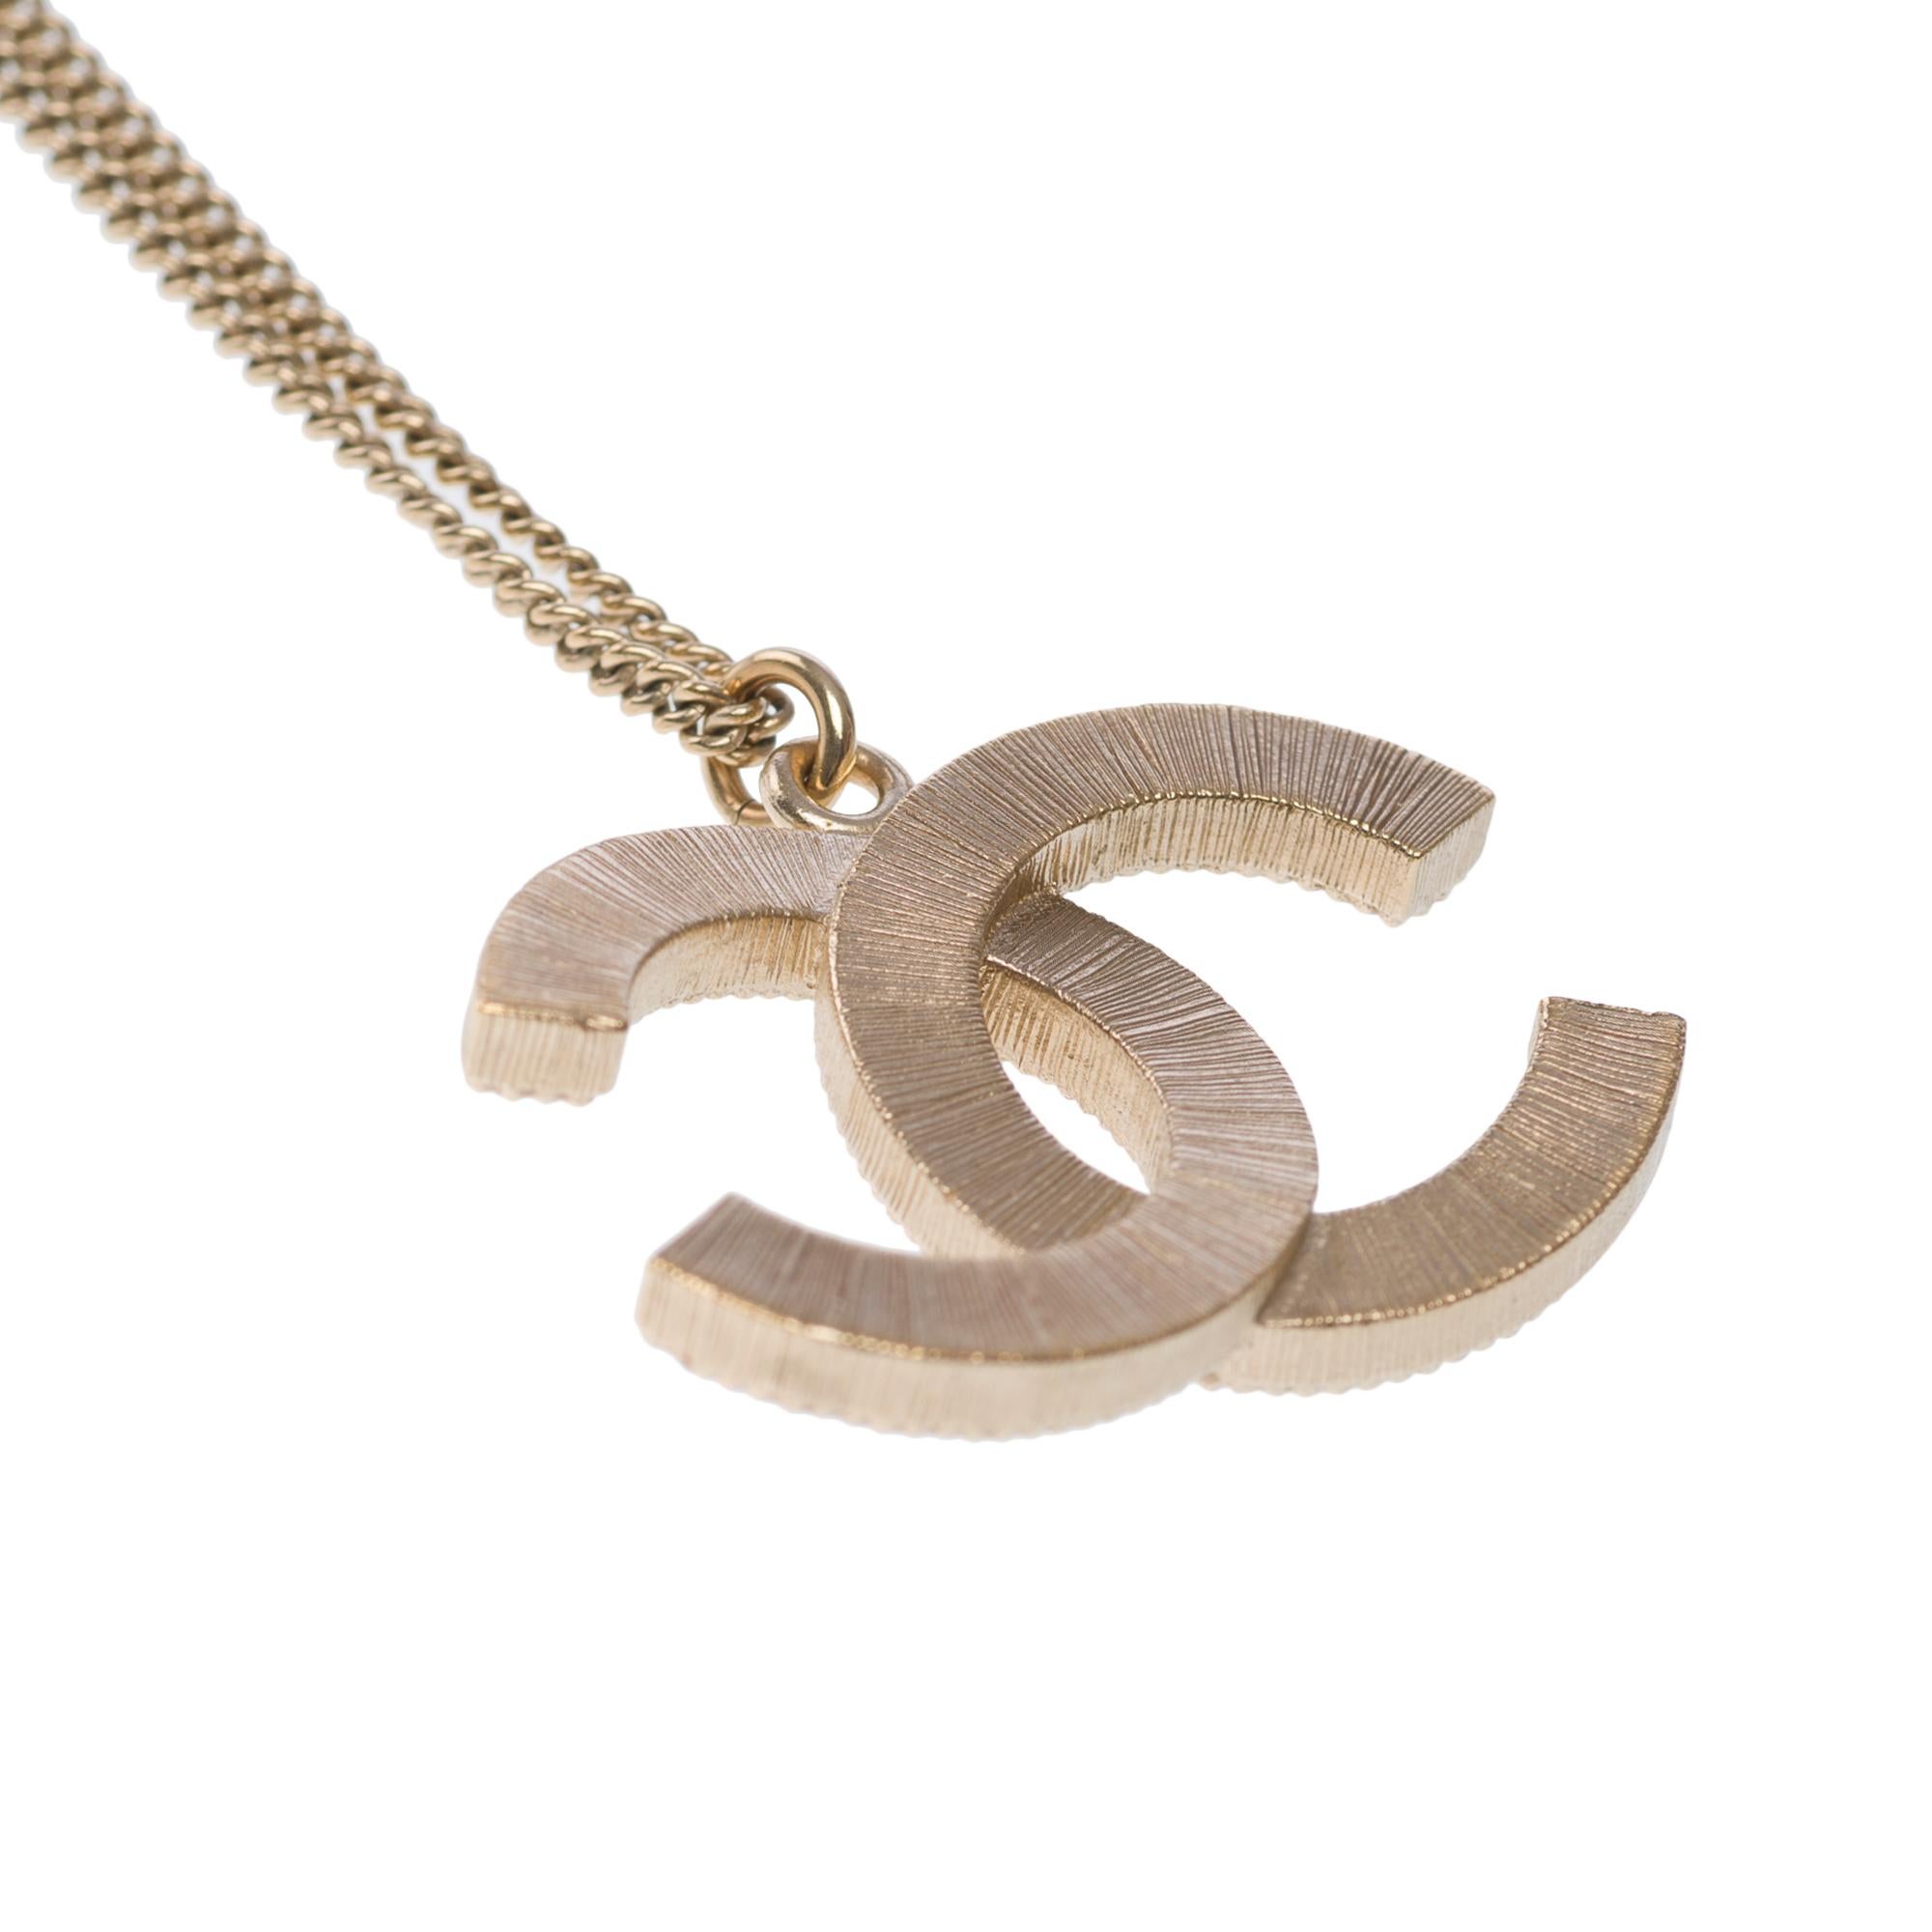 Uncut  Chanel Necklace CC With Pearl and Gold color metal